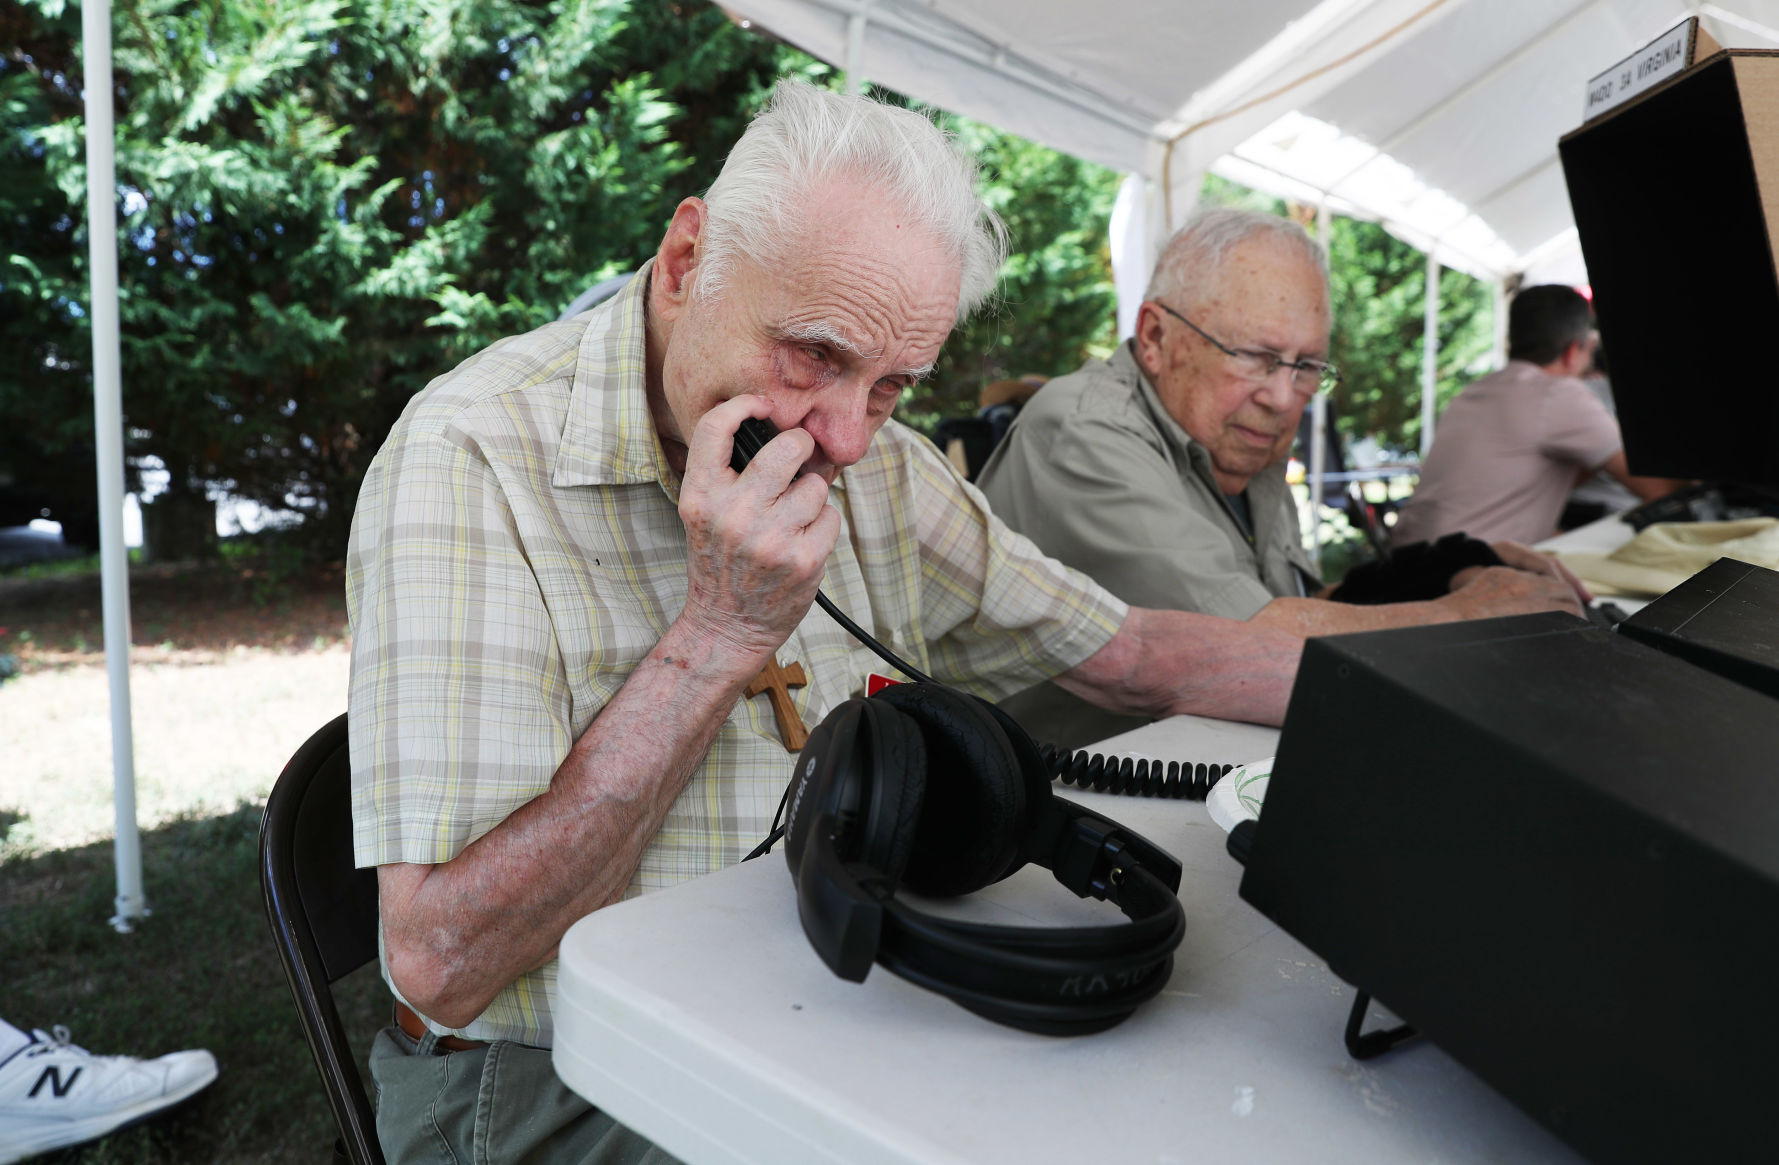 At field day, ham radio enthusiasts show off their magic